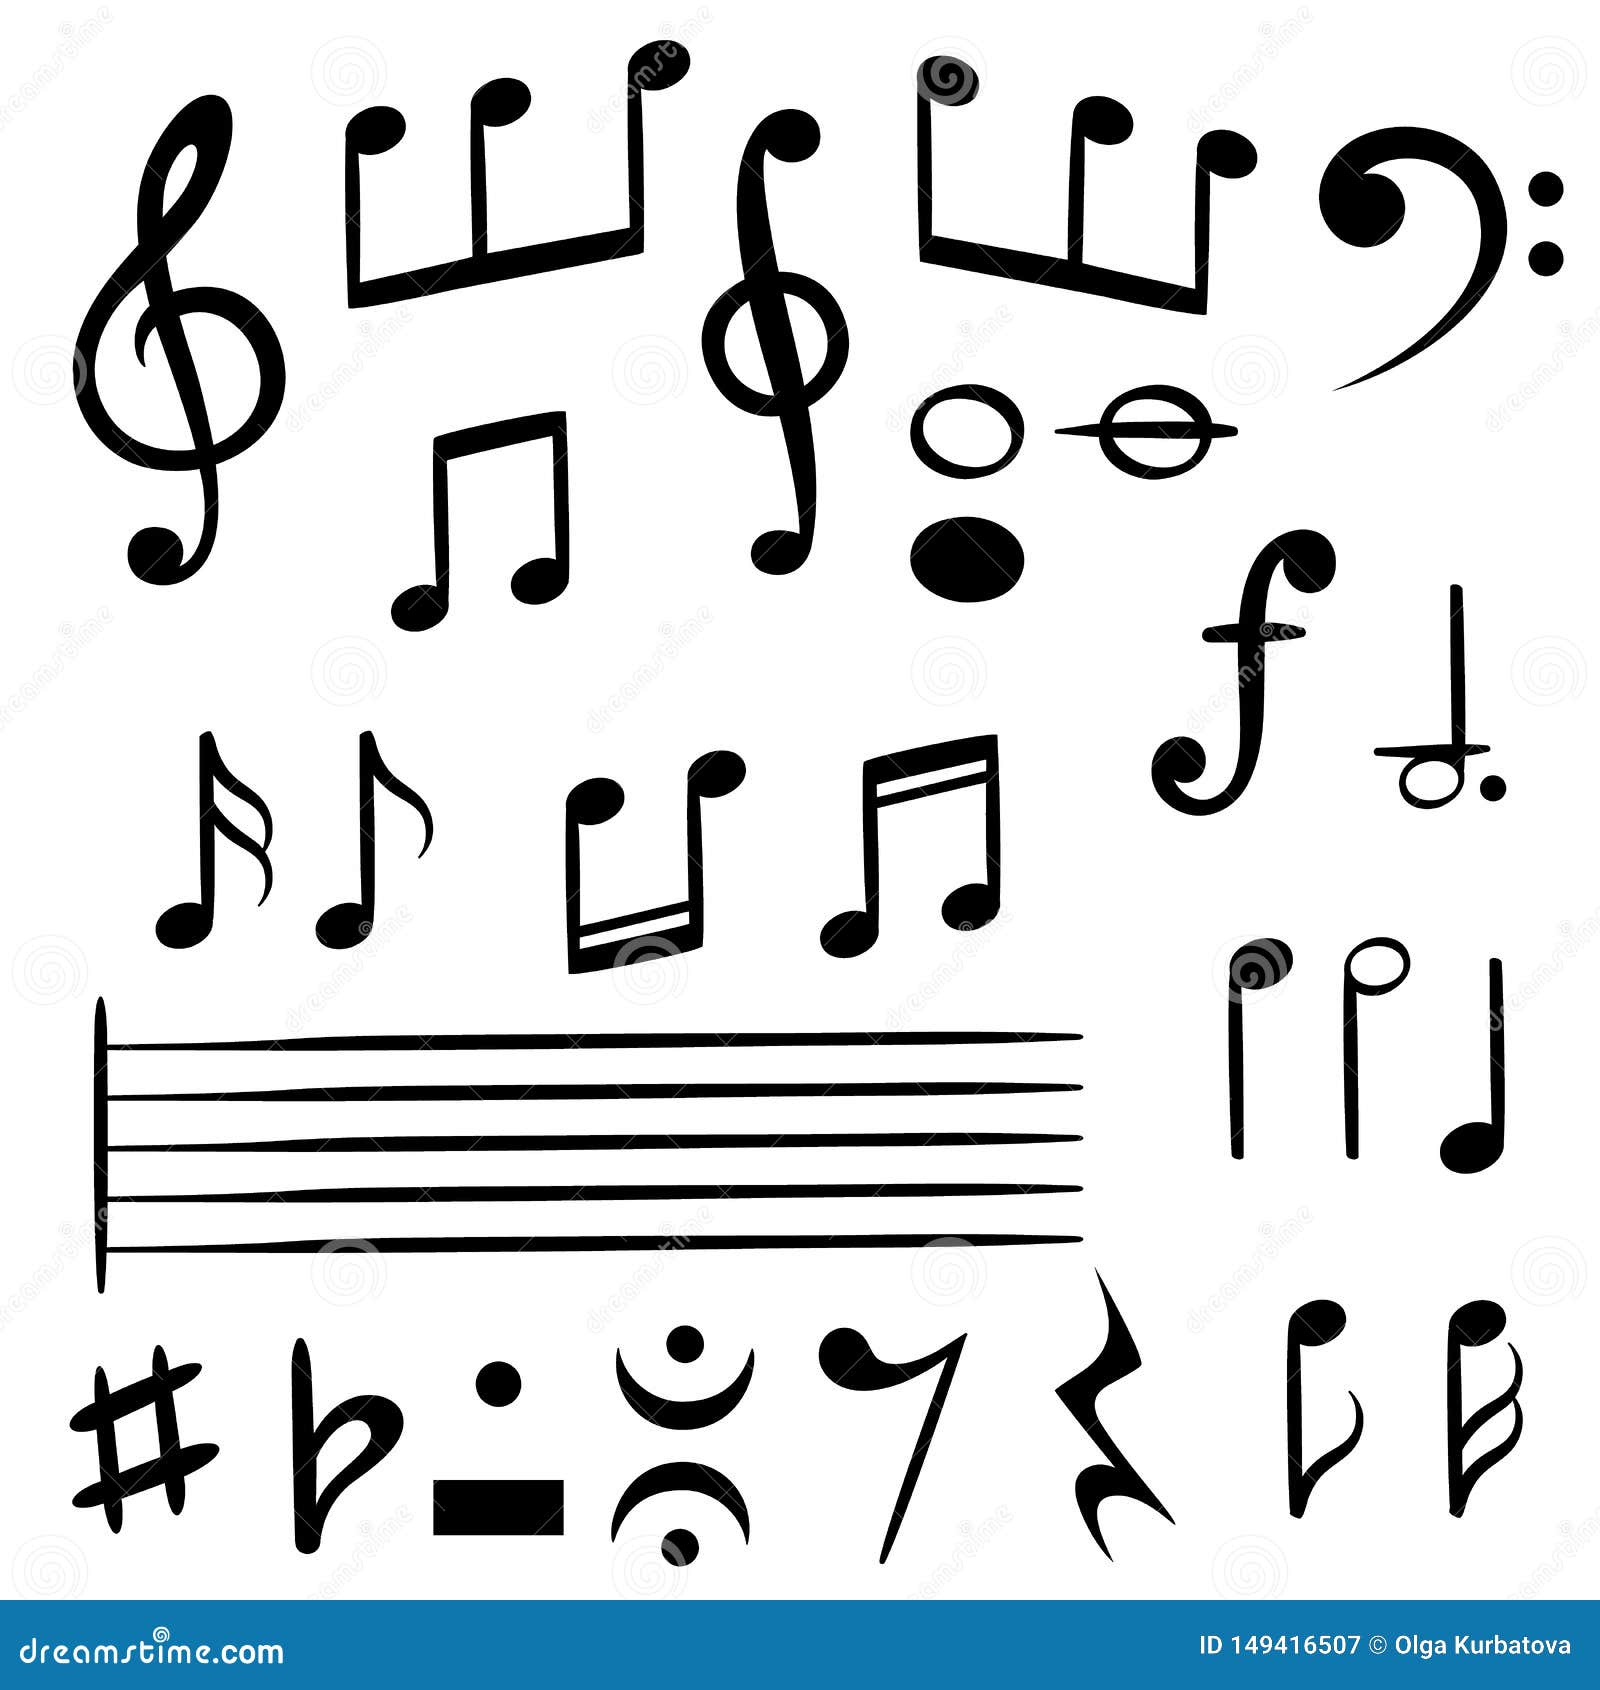 music notes. musical note key silhouette, treble clef sound melody art  s